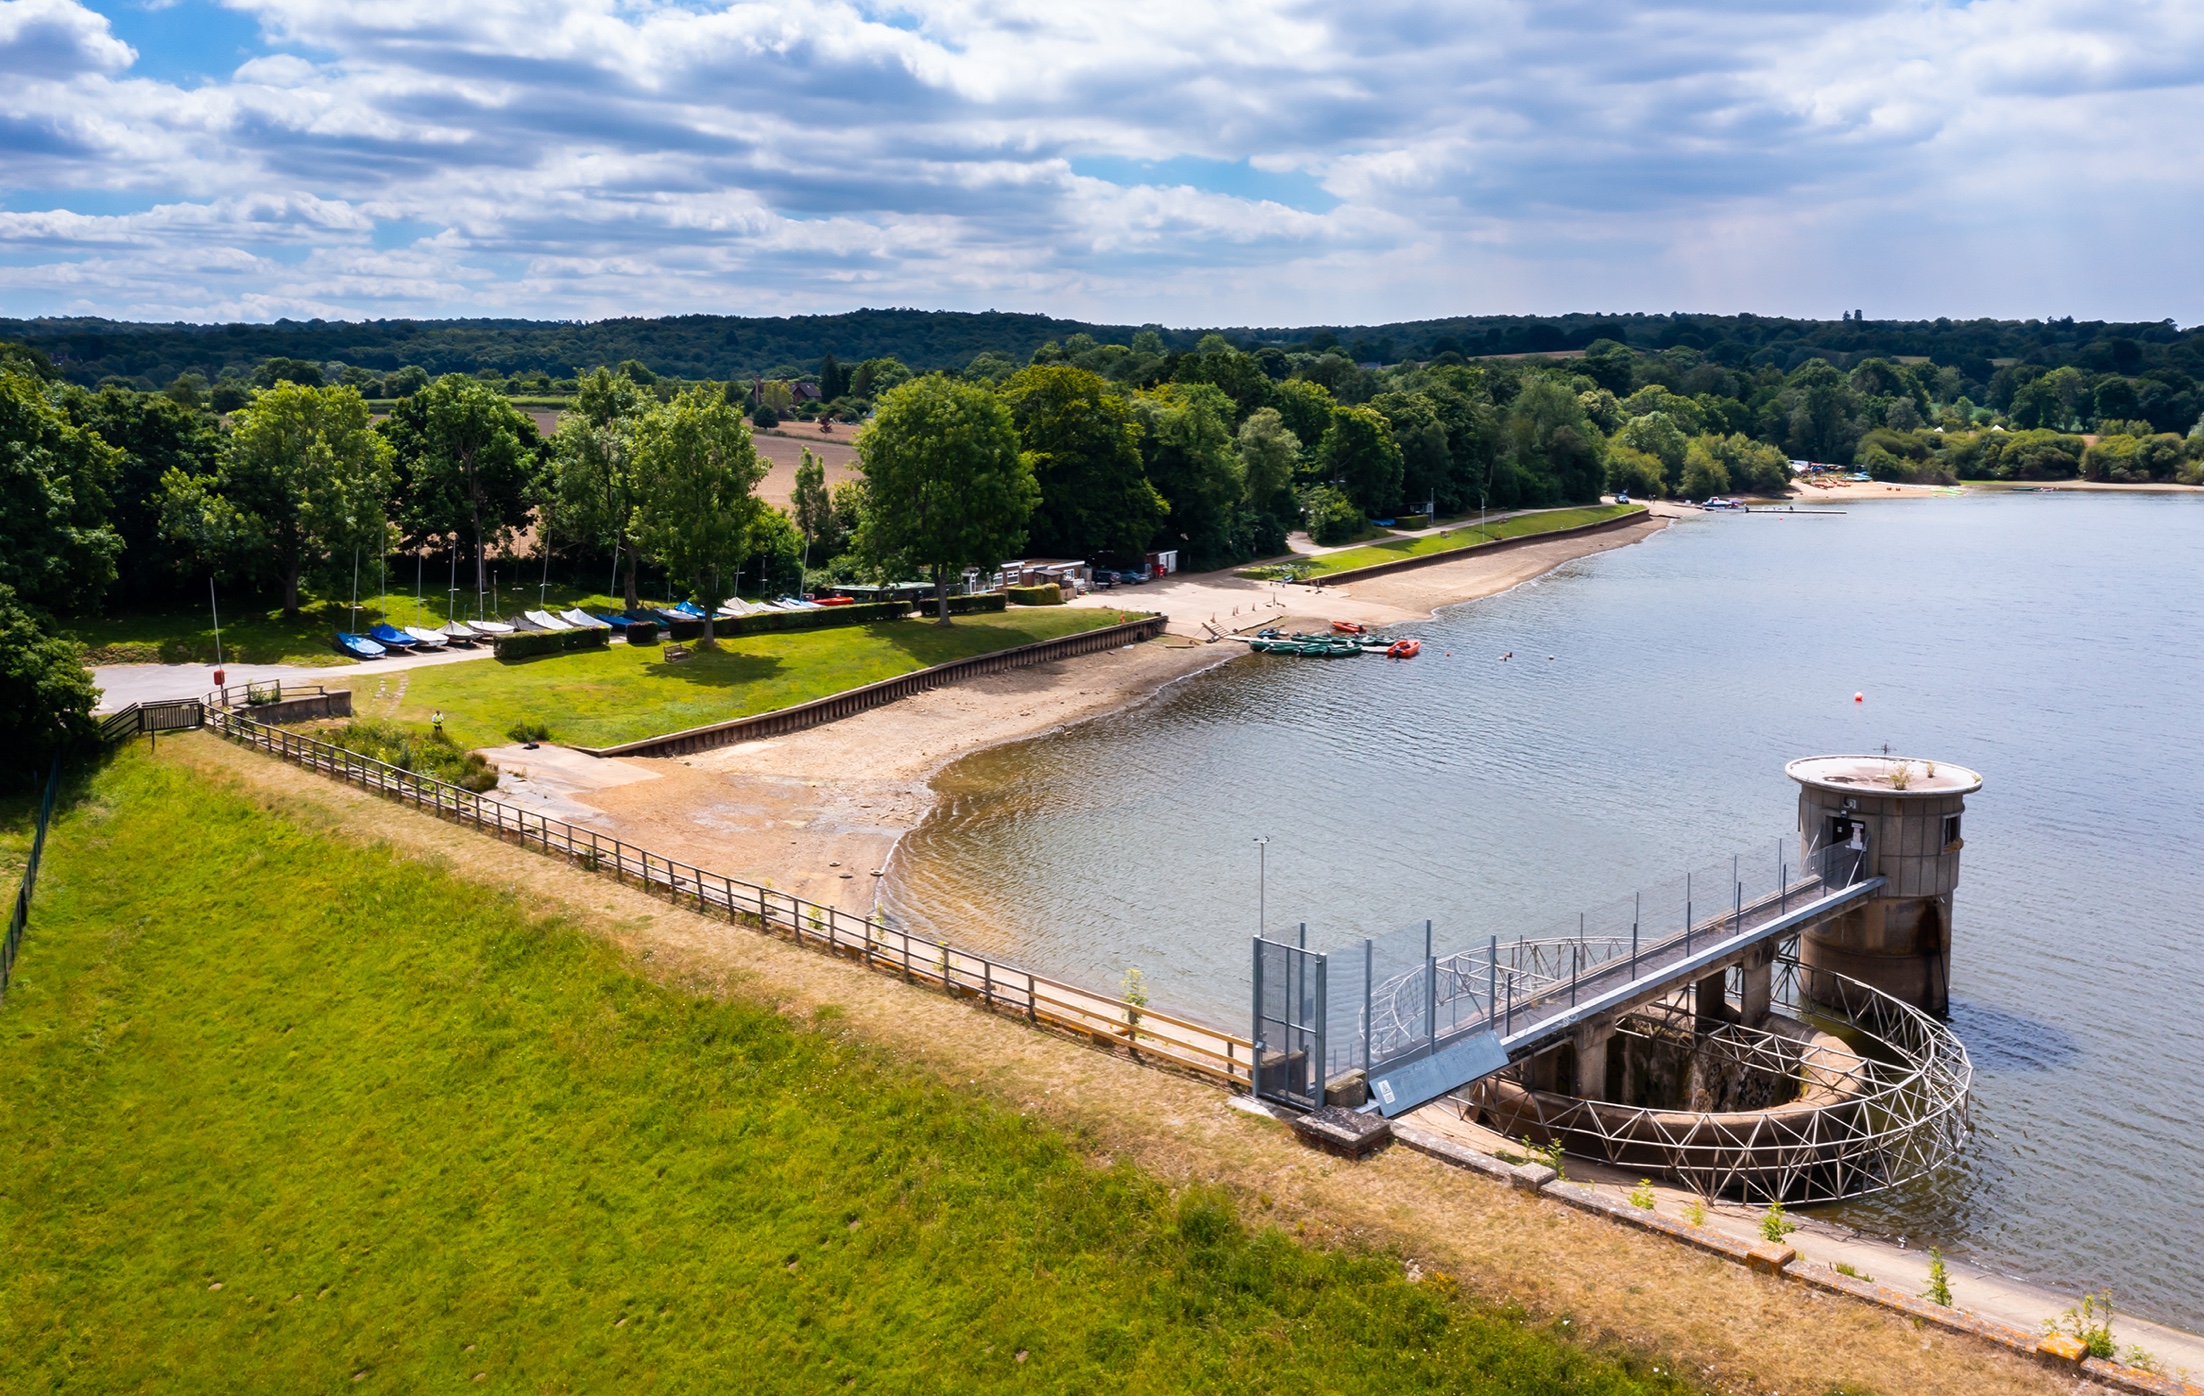 An aerial view of Weir Wood Reservoir and Sailing Club